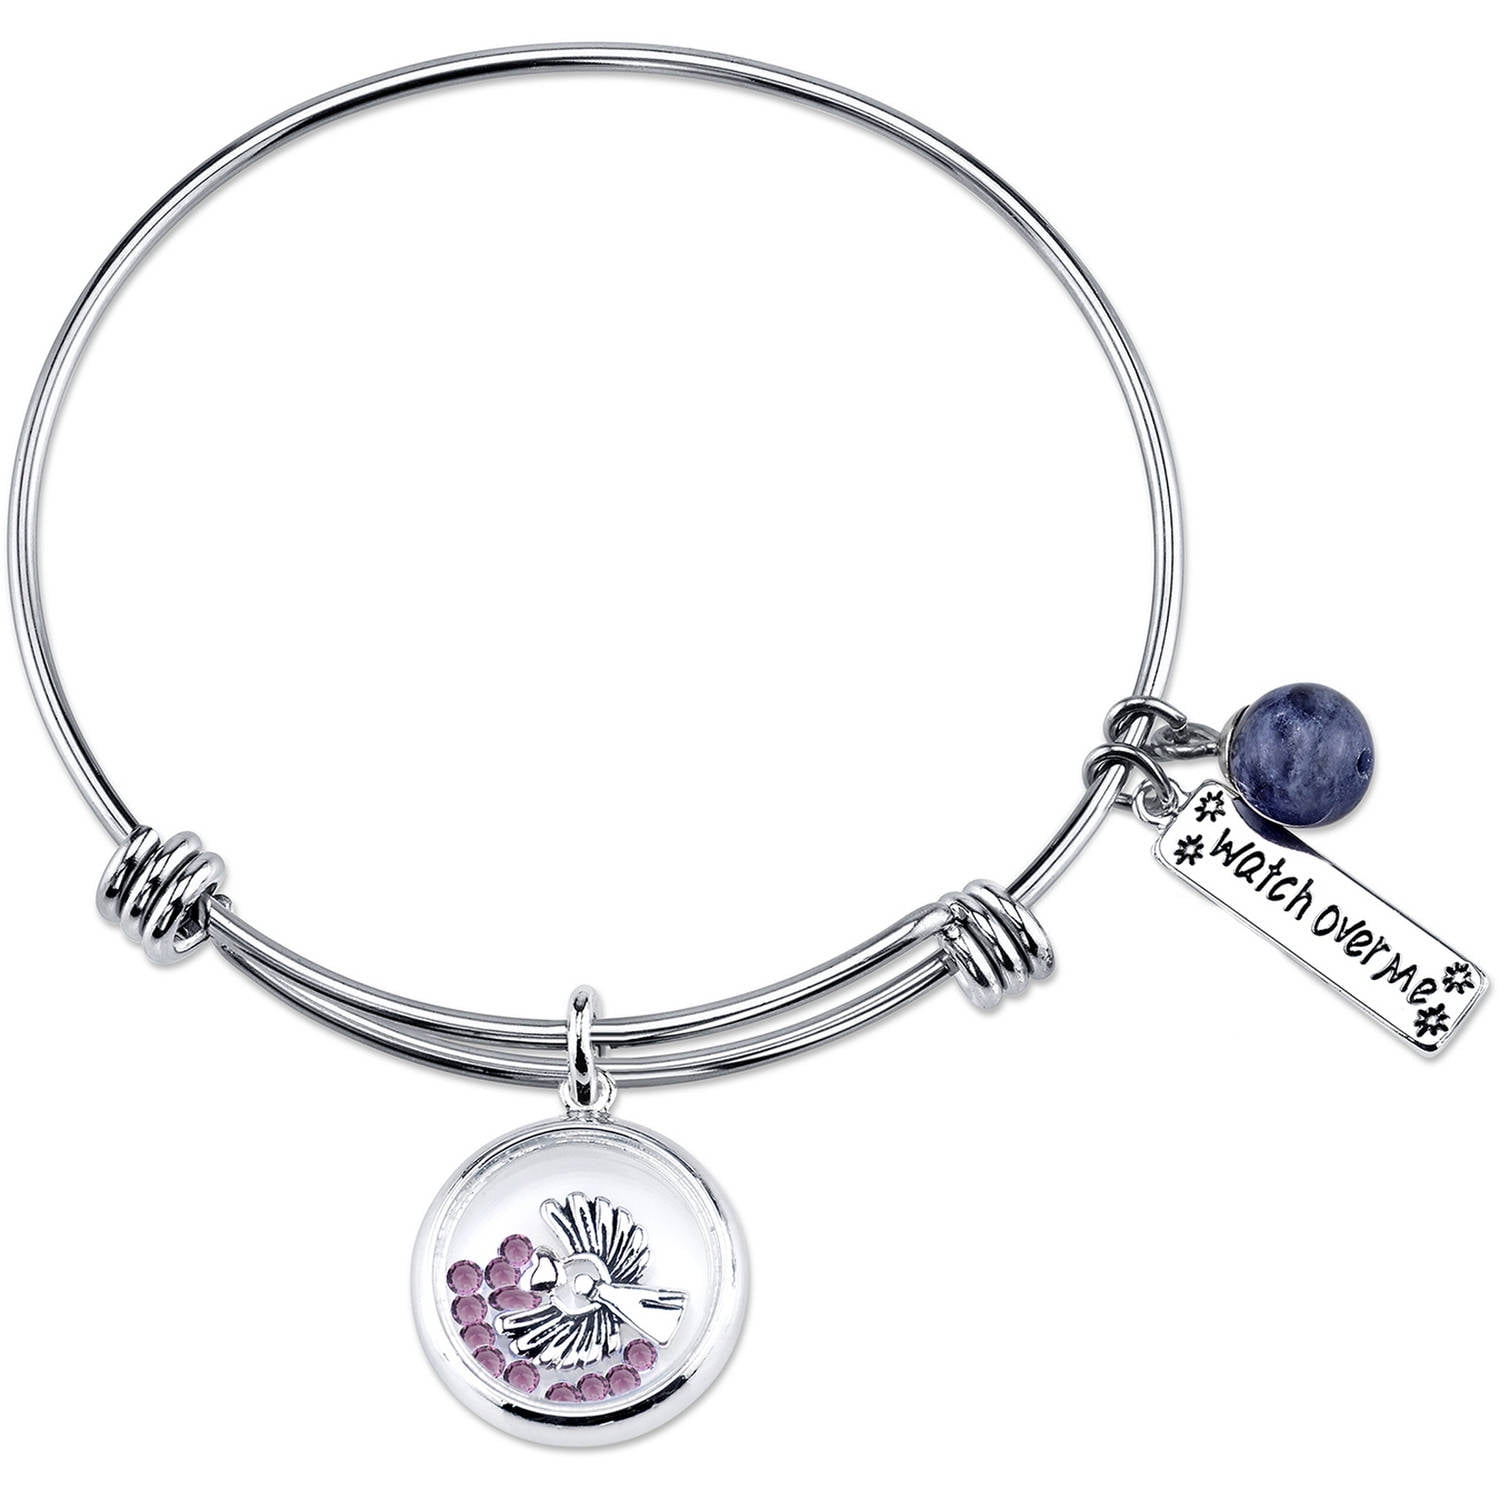 JCPenney FOOTNOTES TOO Footnotes Too Stainless Steel Faith Expandable Bangle   ShopStyle Clothes and Shoes  Bangles Alex and ani charm bracelet  Jcpenney